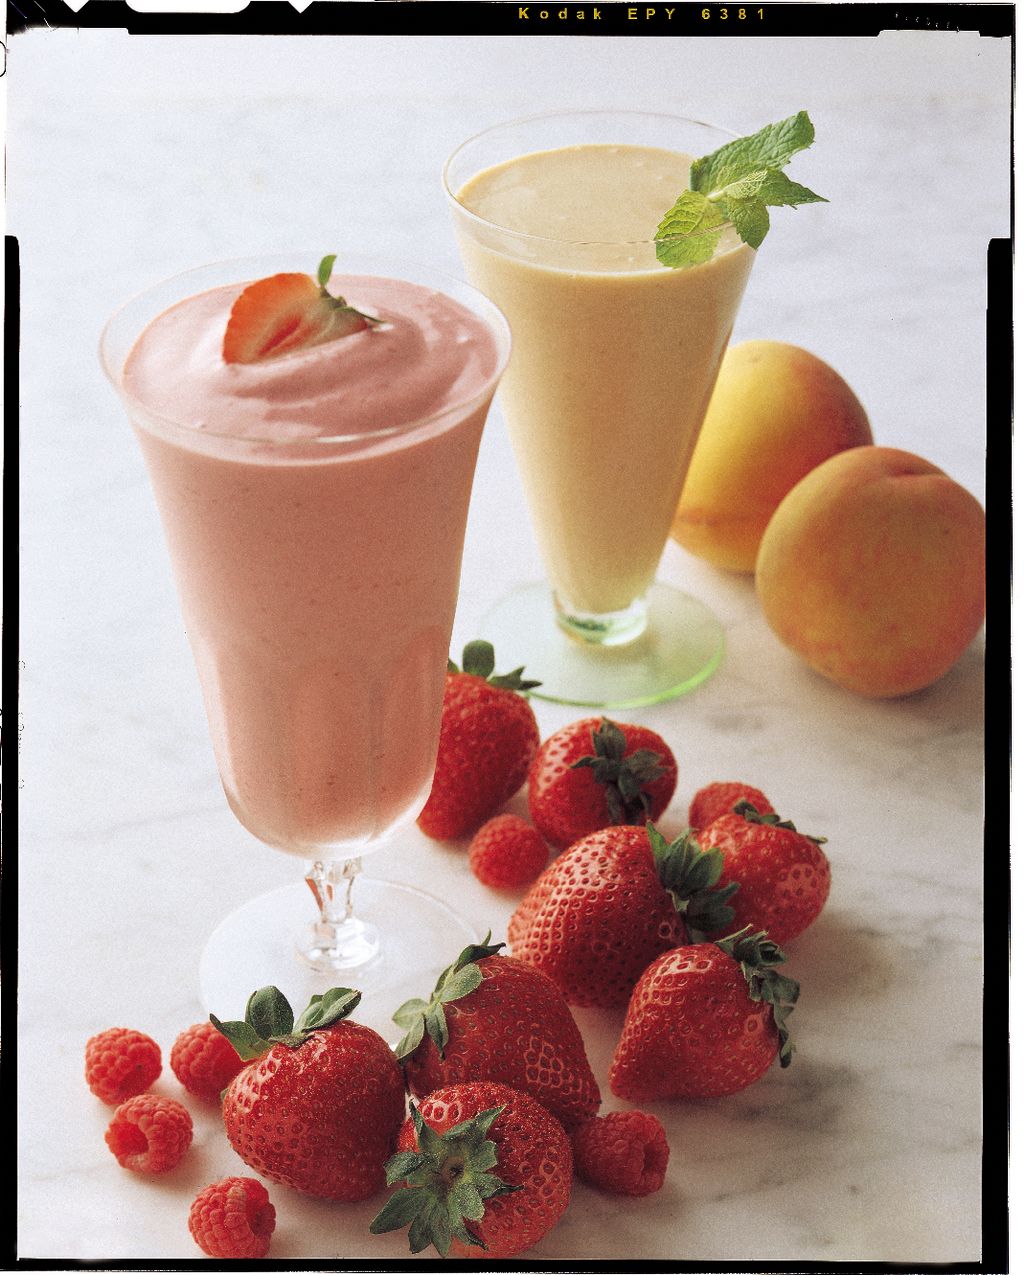 Food, Fruit, Drink, Natural foods, Produce, Ingredient, Juice, Strawberry, Citrus, Drinking straw, 